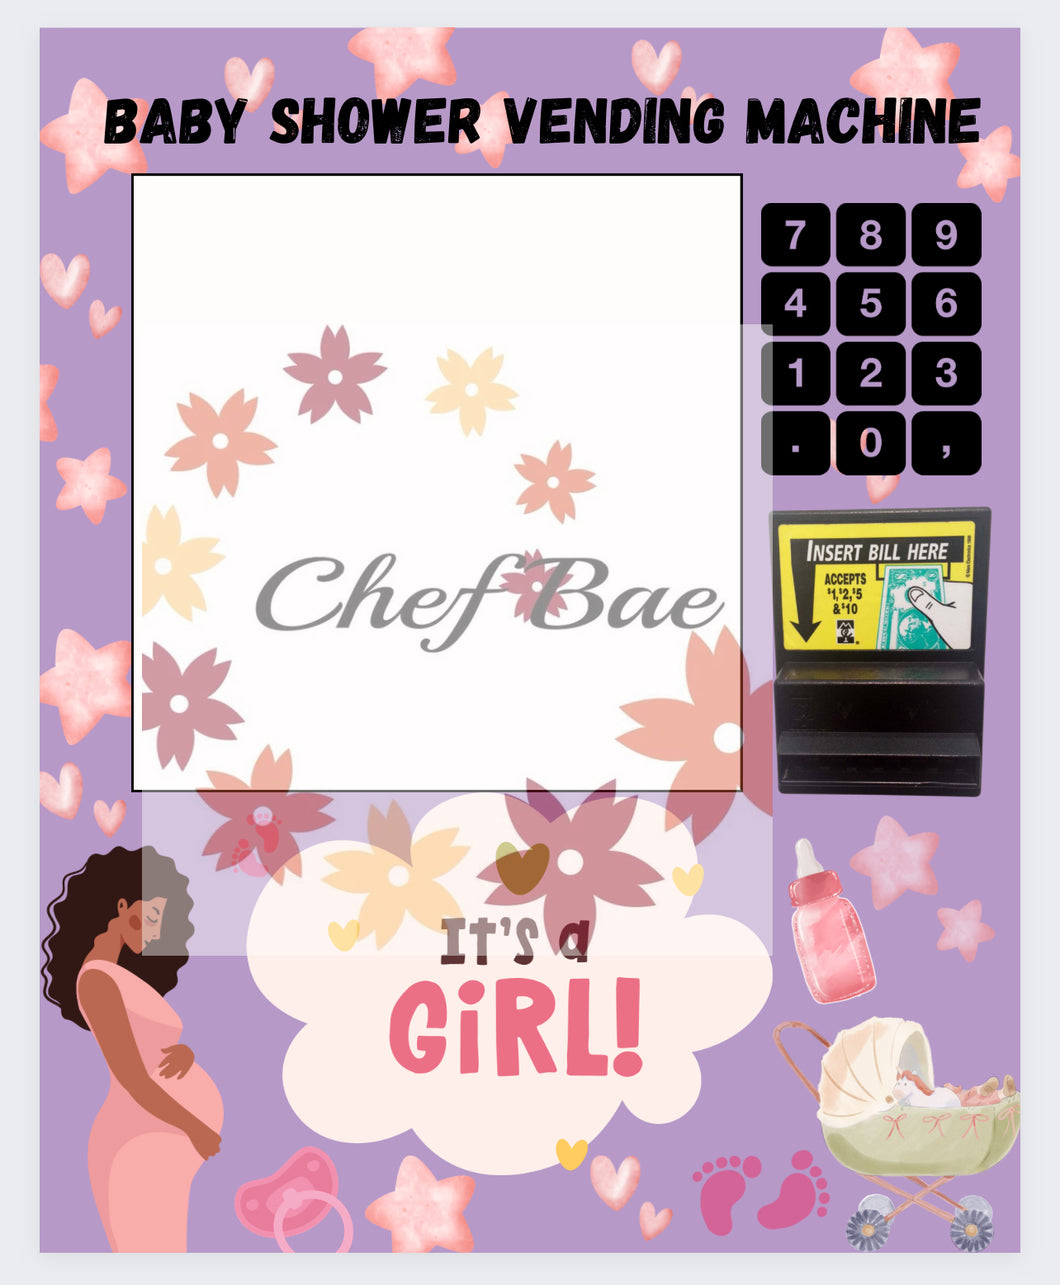 Baby Shower Canva Templates for Vending Machines (10 templates included)